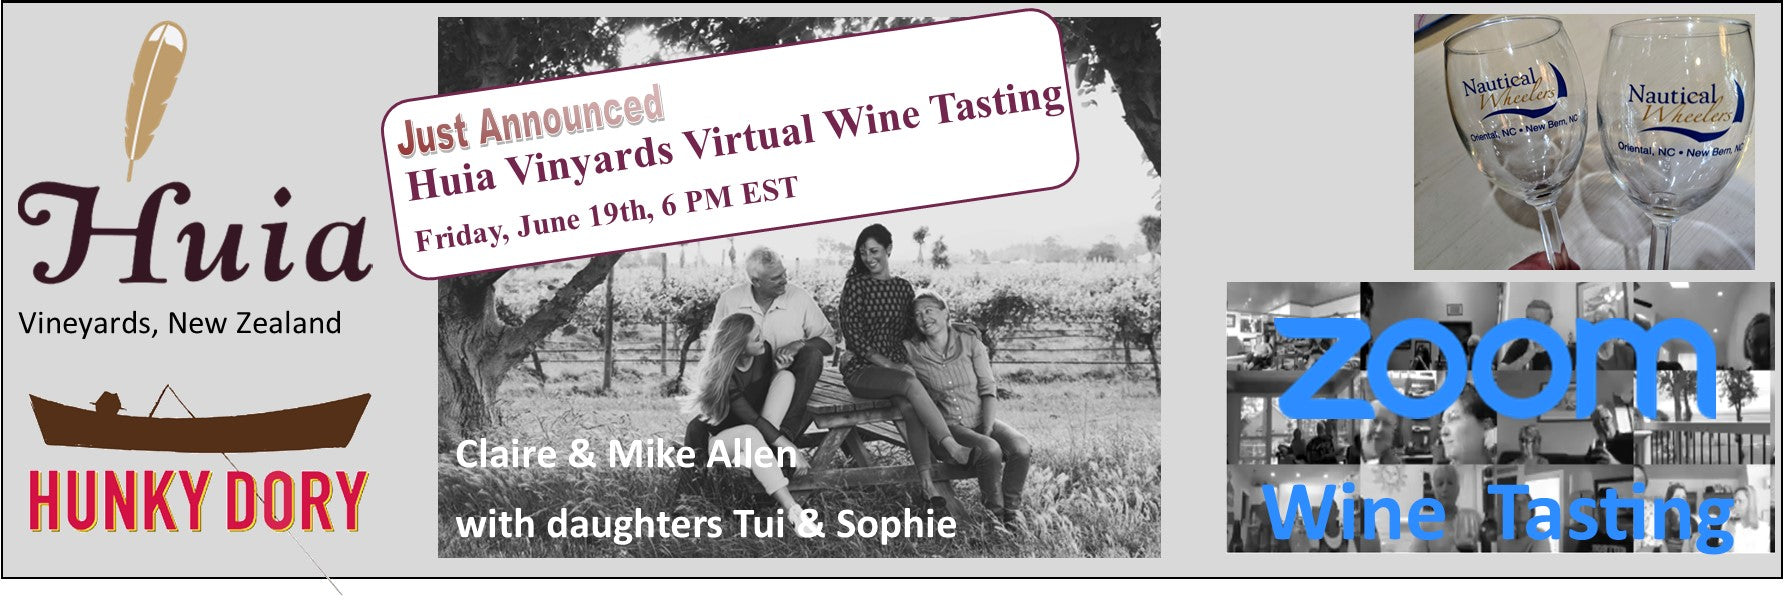 ZOOM to New Zealand for Our Next Virtual Wine Tasting Friday, June 19th, 6 pm